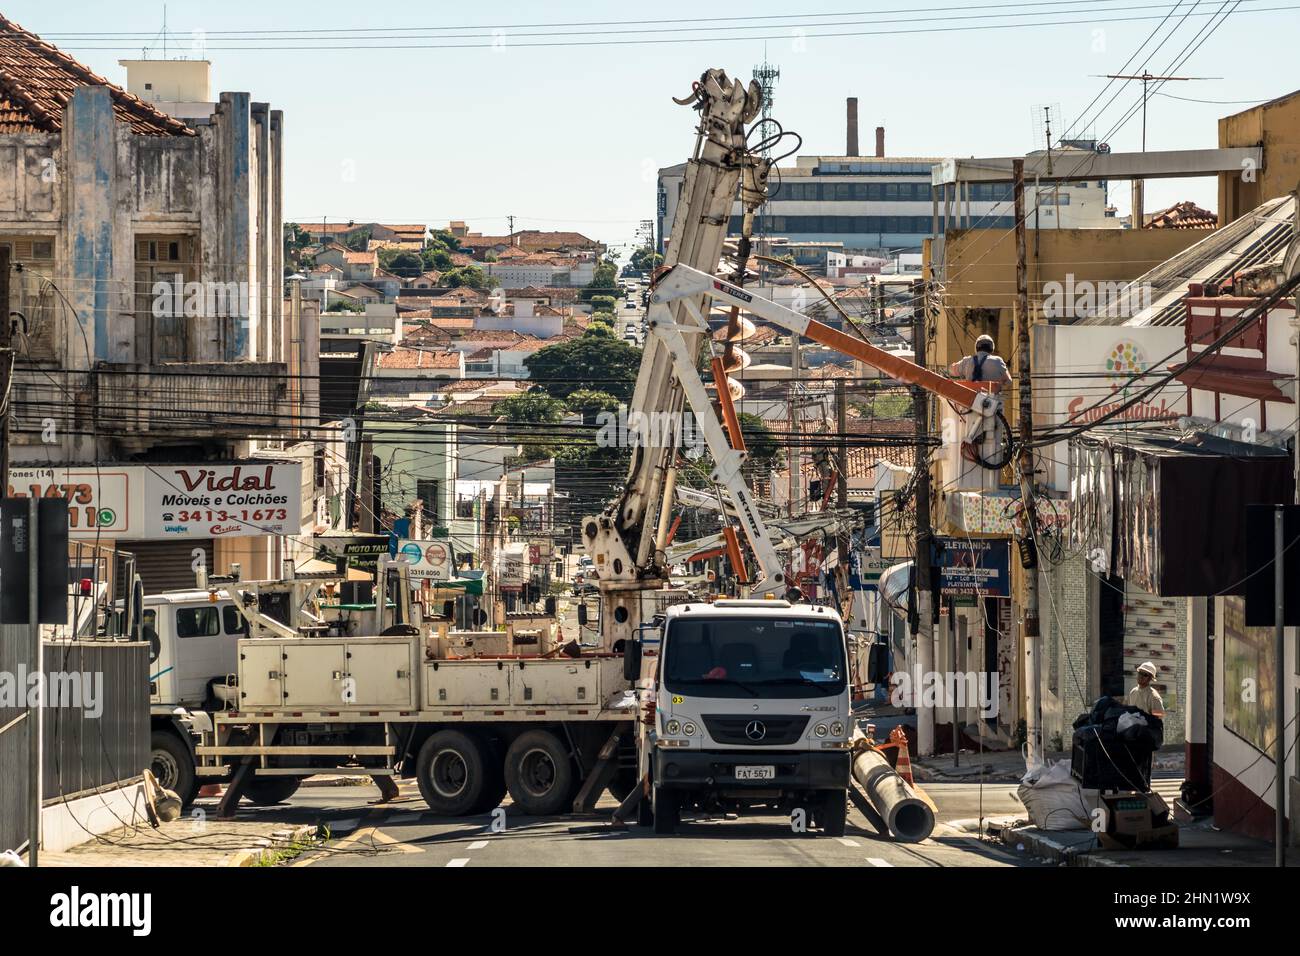 Marília, São Paulo, Brazil, May 26, 2019 Workers change poles and maintain the power grid on a street in downtown Marília. Stock Photo